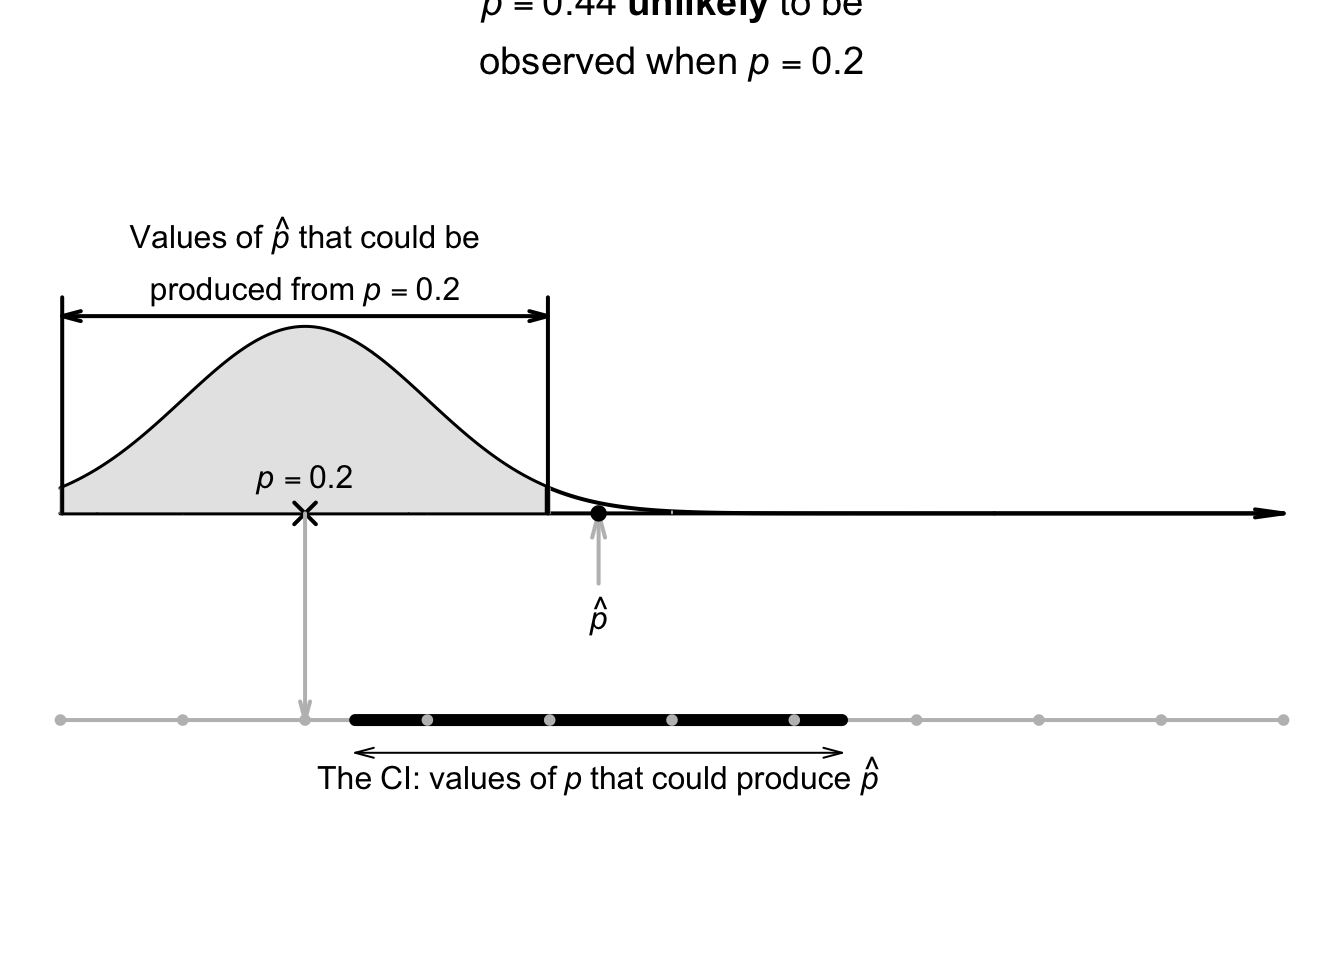 The CI gives an interval containing values of $p$ that may have produced the observed value of $\hat{p}$. Here, the CI is $0.241$ to $0.639$.